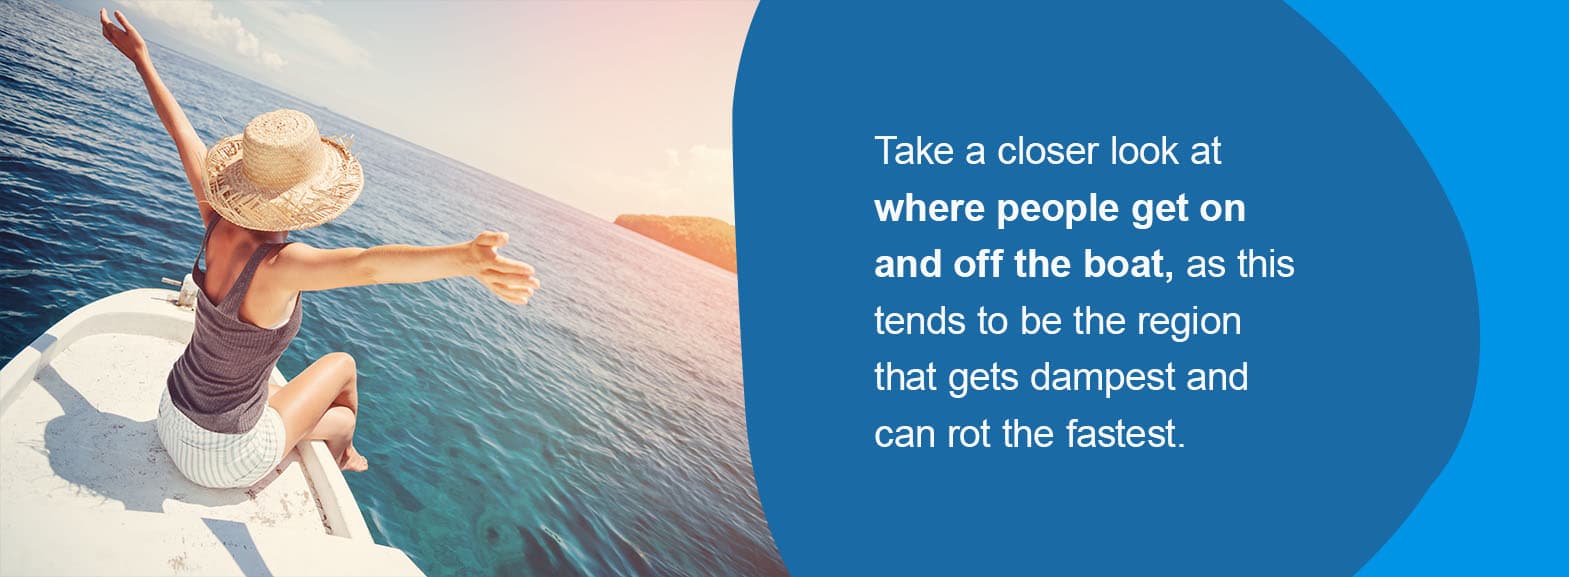  Take a closer look at where people get on and off the boat, as this tends to be the region that gets dampest and can rot the fastest. 